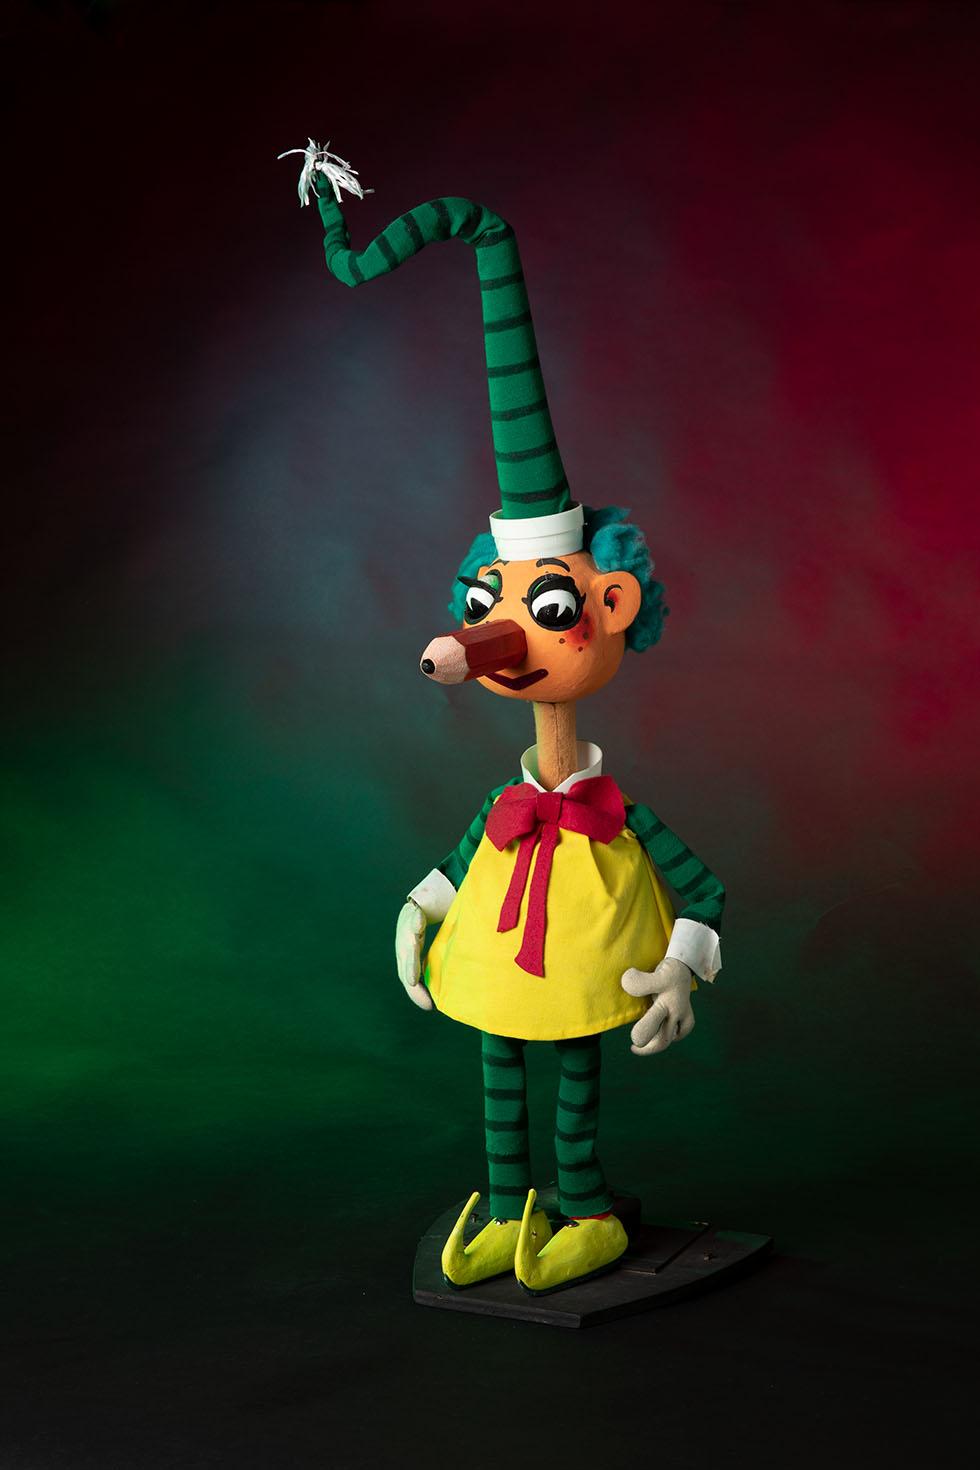 Colour photograph of Mr Squiggle, dressed in a yellow smock, red tie, green and black striped hat.